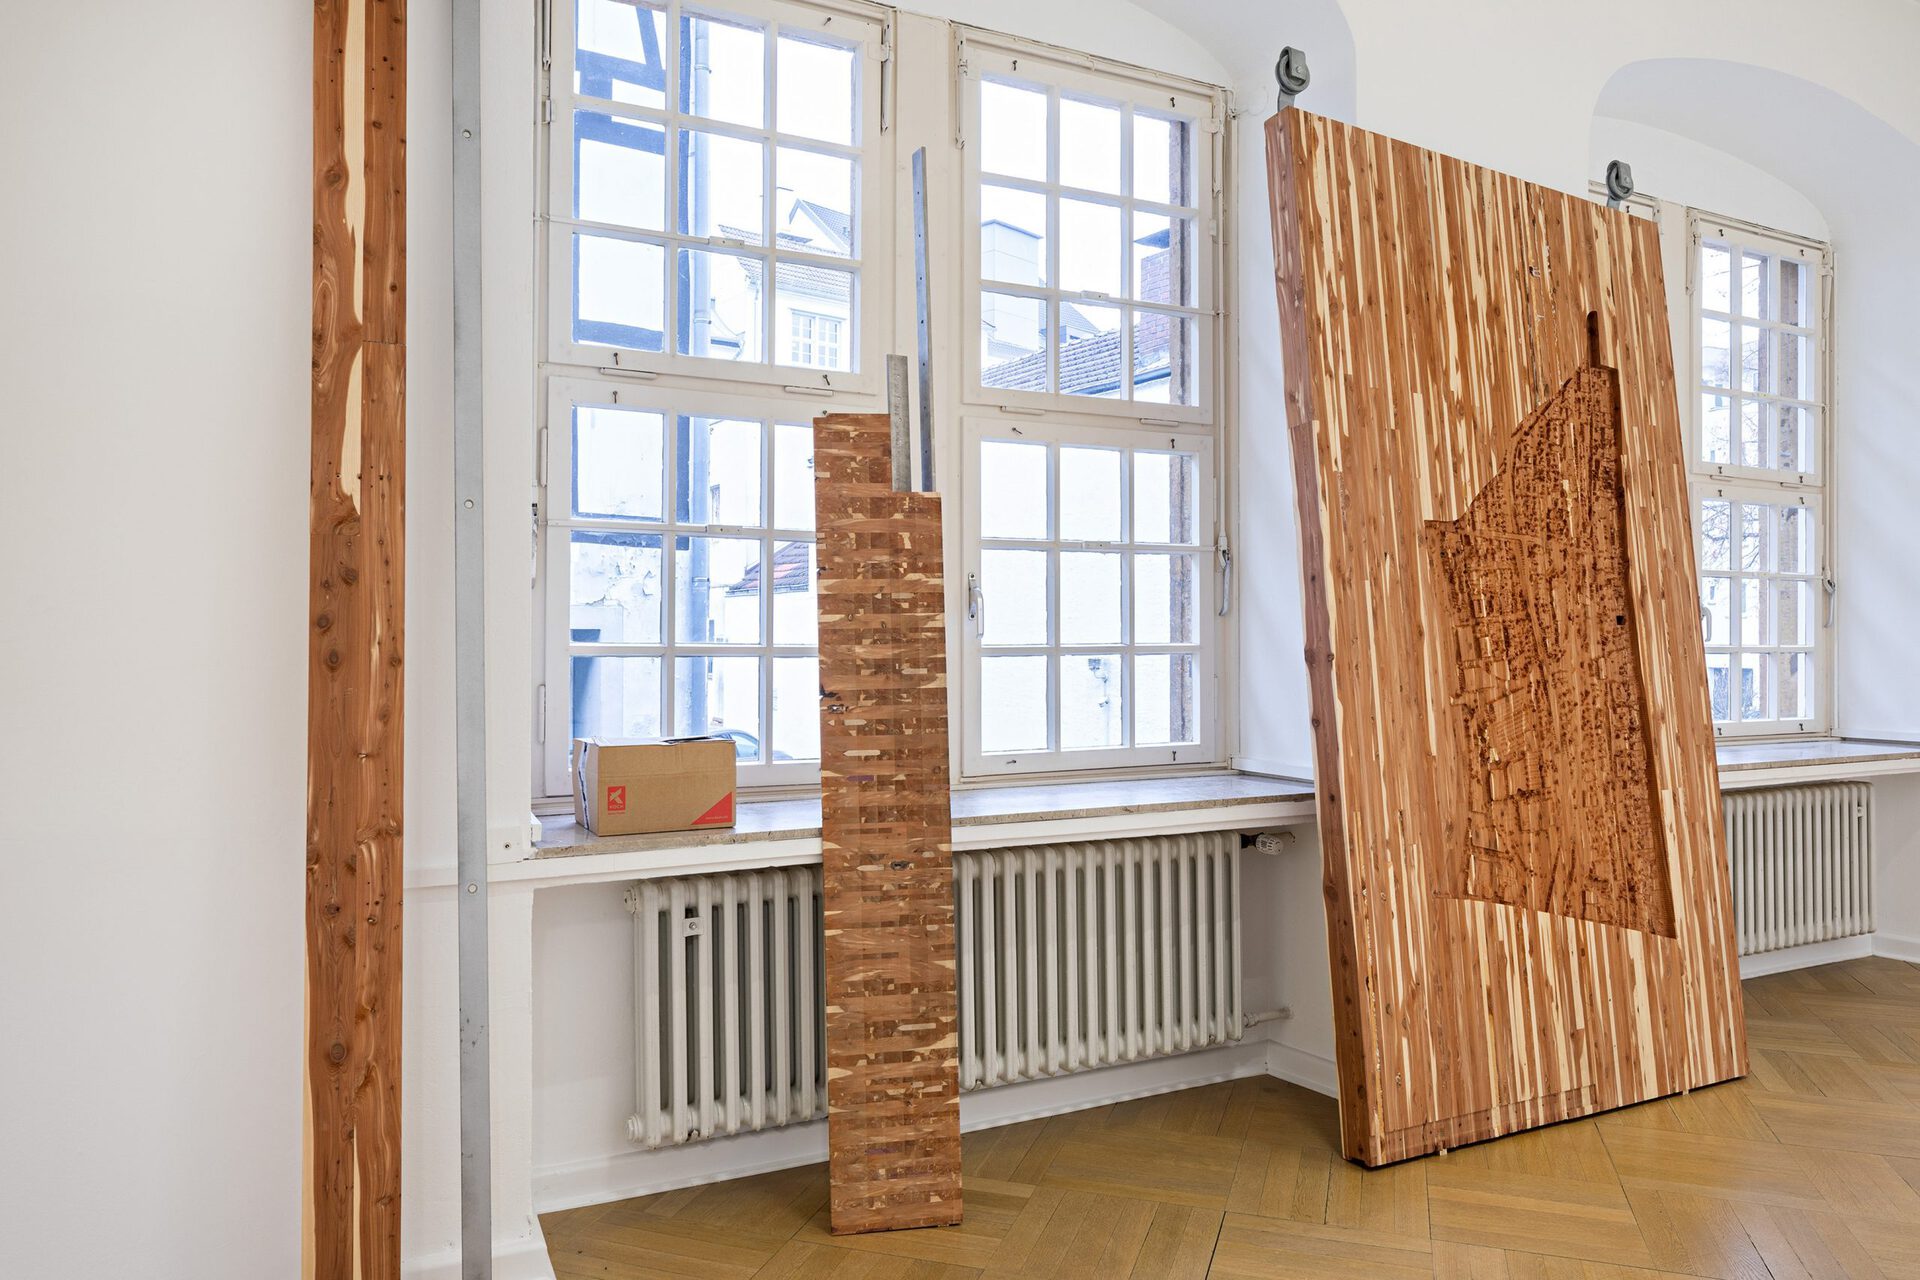 Flint Jamison, Opportunity Zone, 2019, exhibition view THE EQUALITY OF POSSIBILITY, Kunstverein Bielefeld, 2021. Photo: Fred Dott